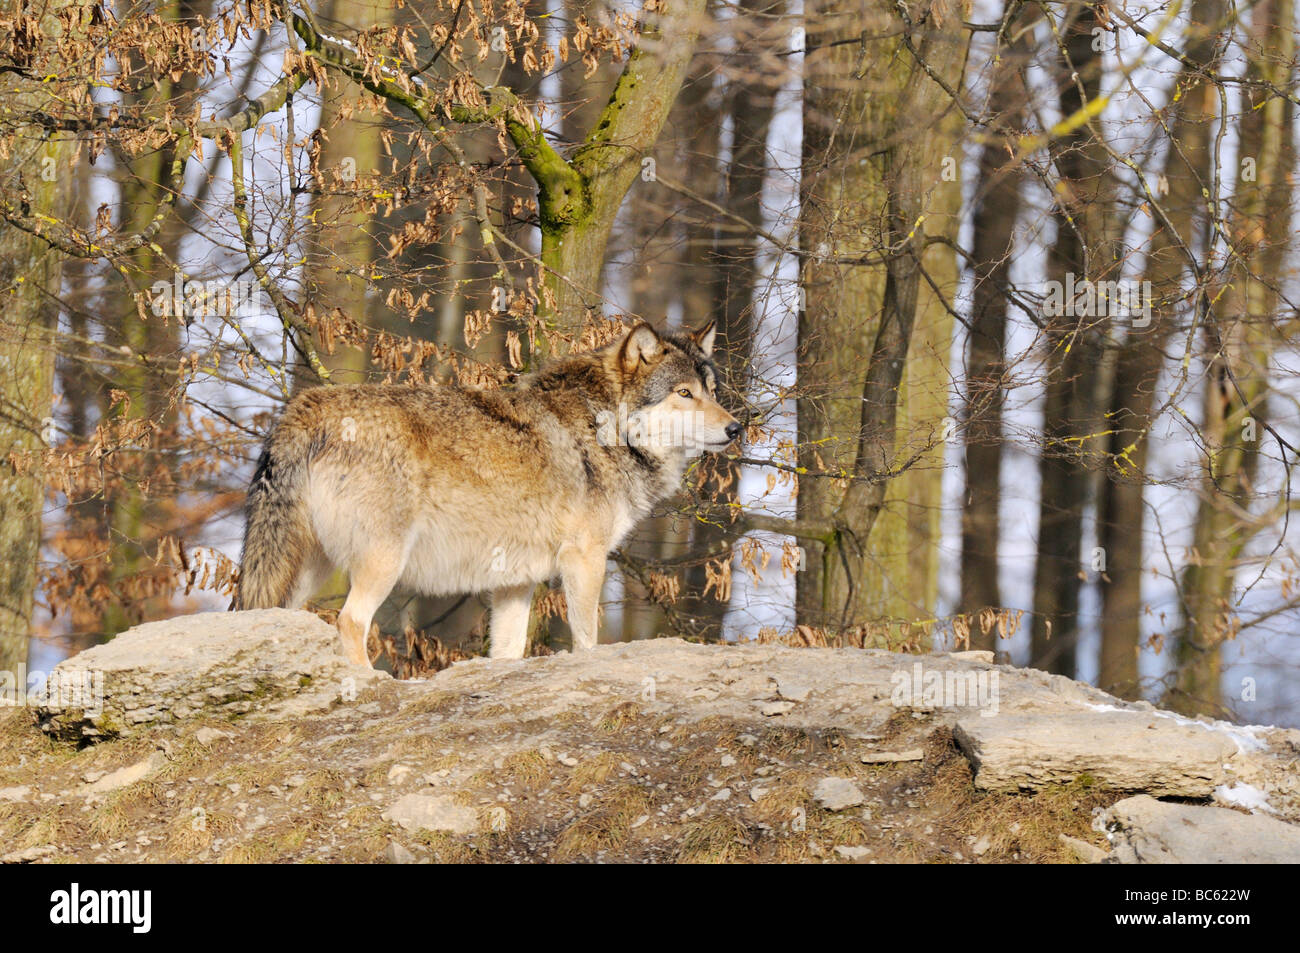 Grey wolf (Canis lupus) standing in forest Stock Photo